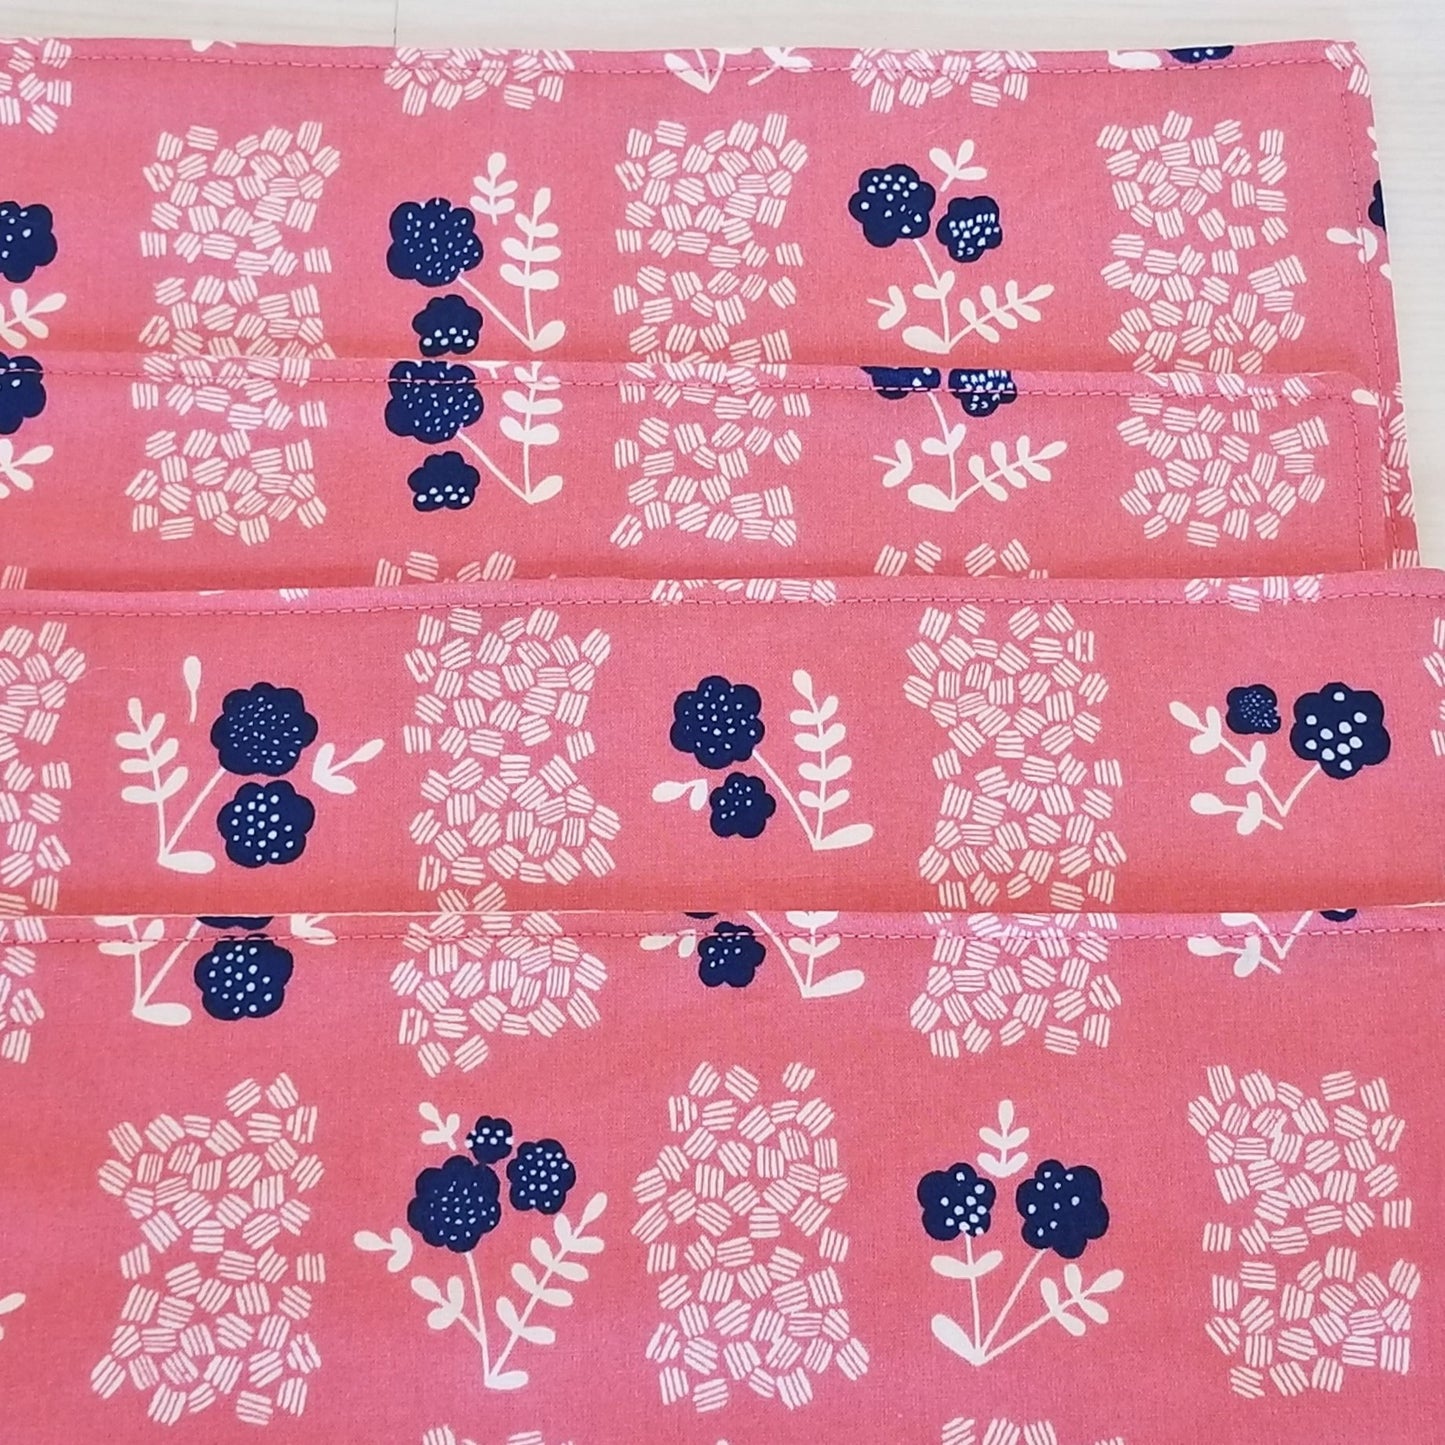 Floral Placemats in Organic Cotton